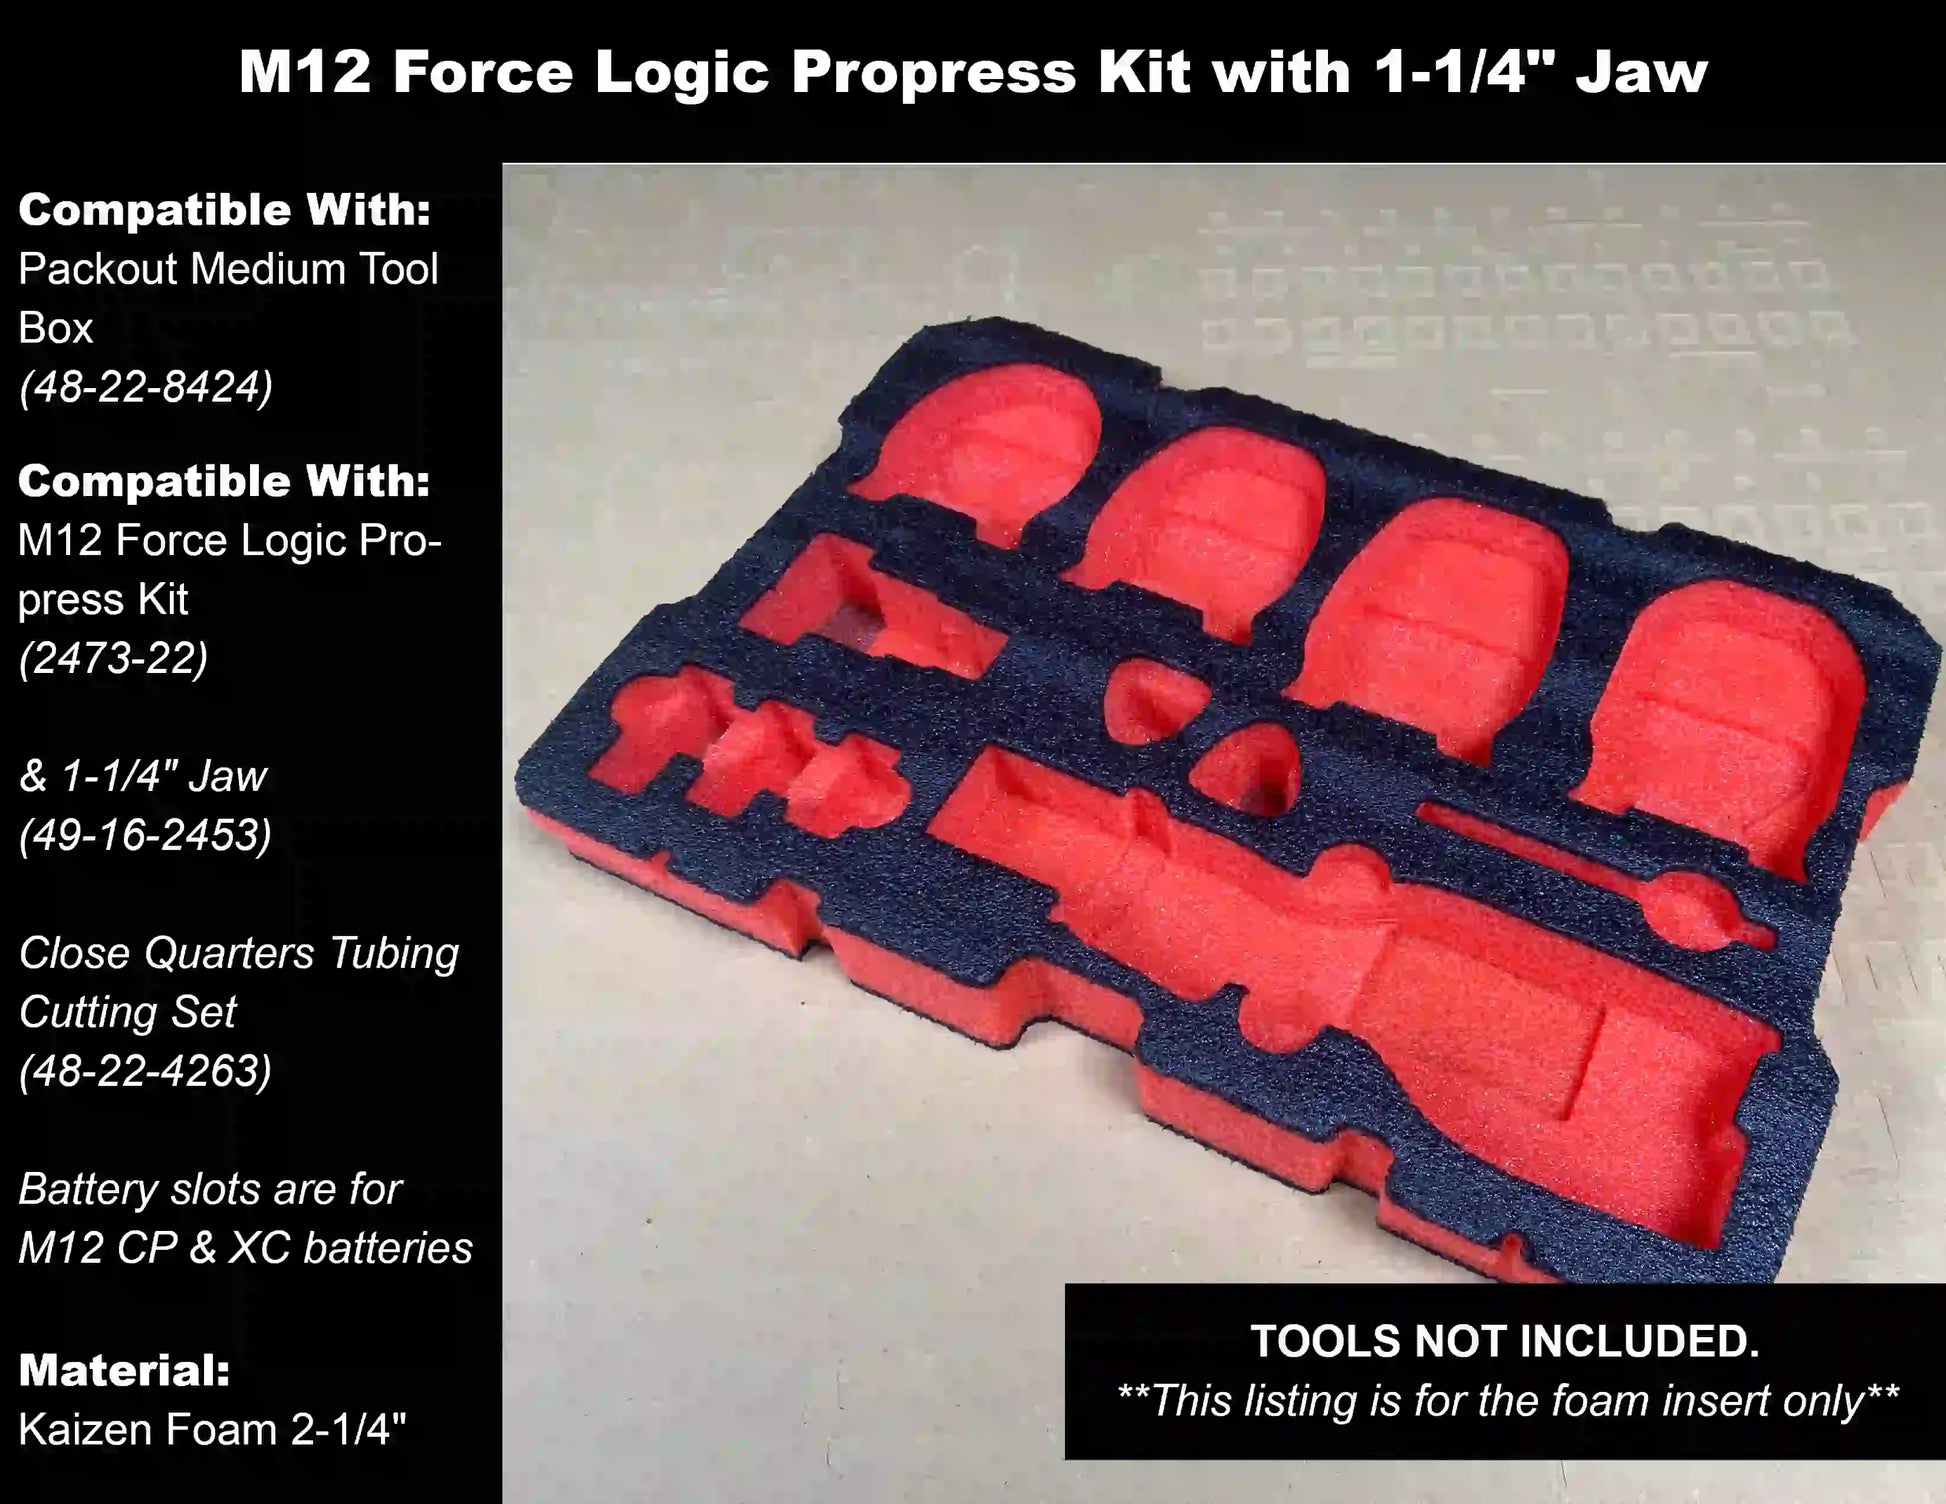 FOAM INSERT to store M12 Force Logic Press Kit 2473-22 and 1-1/4